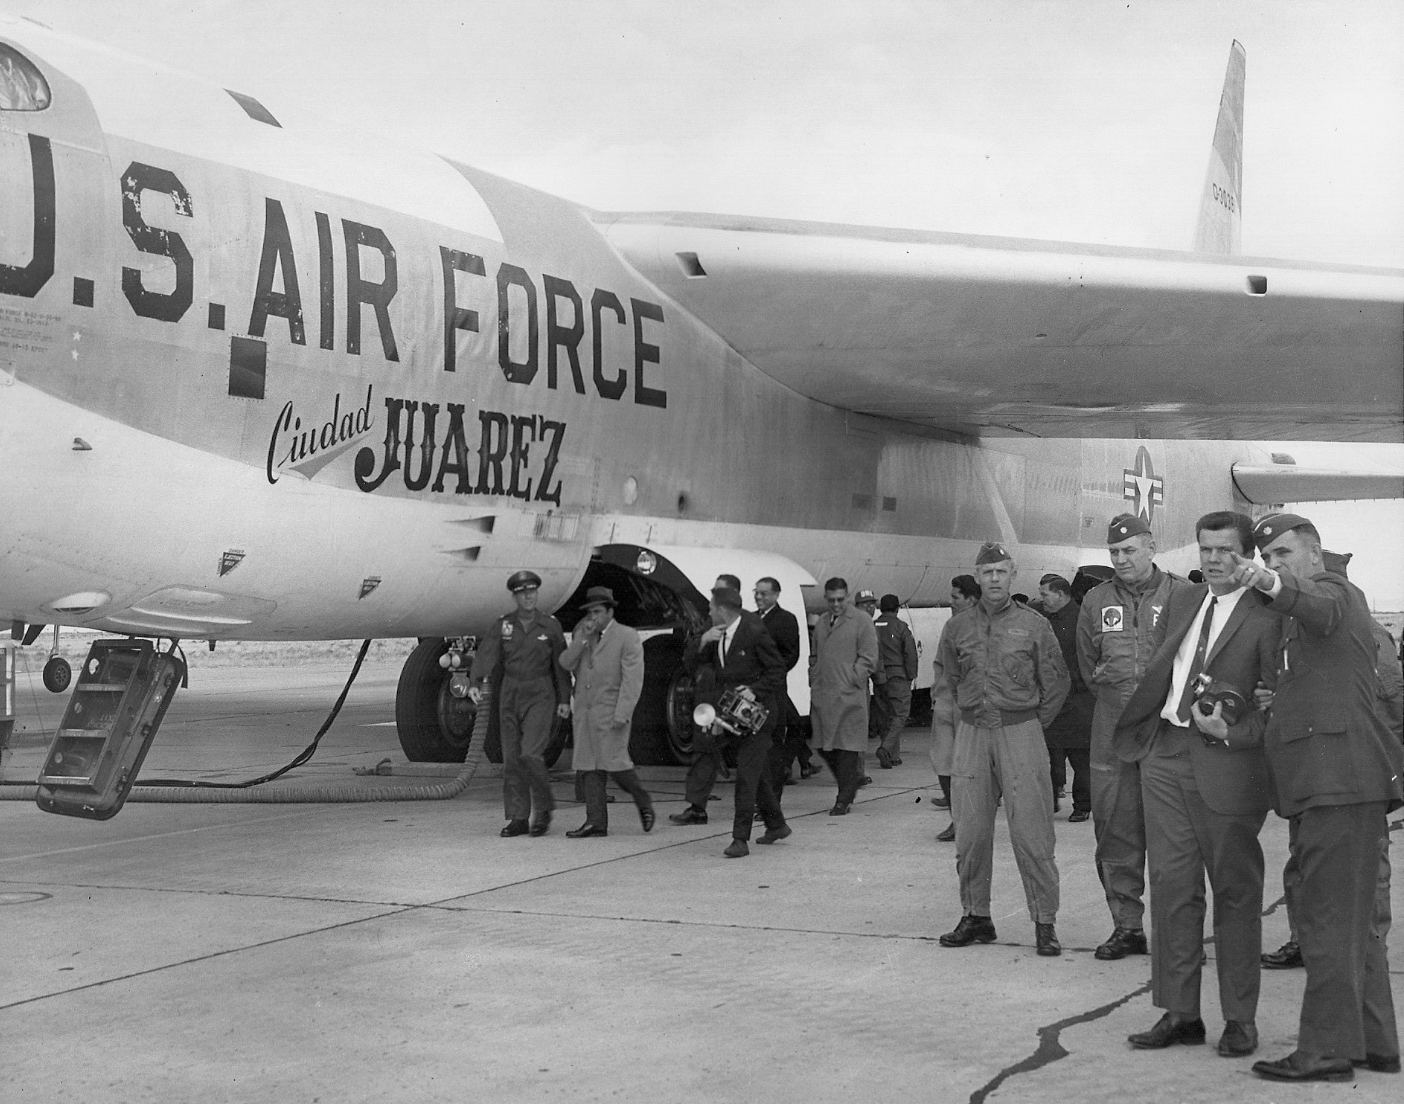 When 53-380 was assigned to the 95th Bombardment Wing, it was named Ciudad Juarez. (Unattributed)